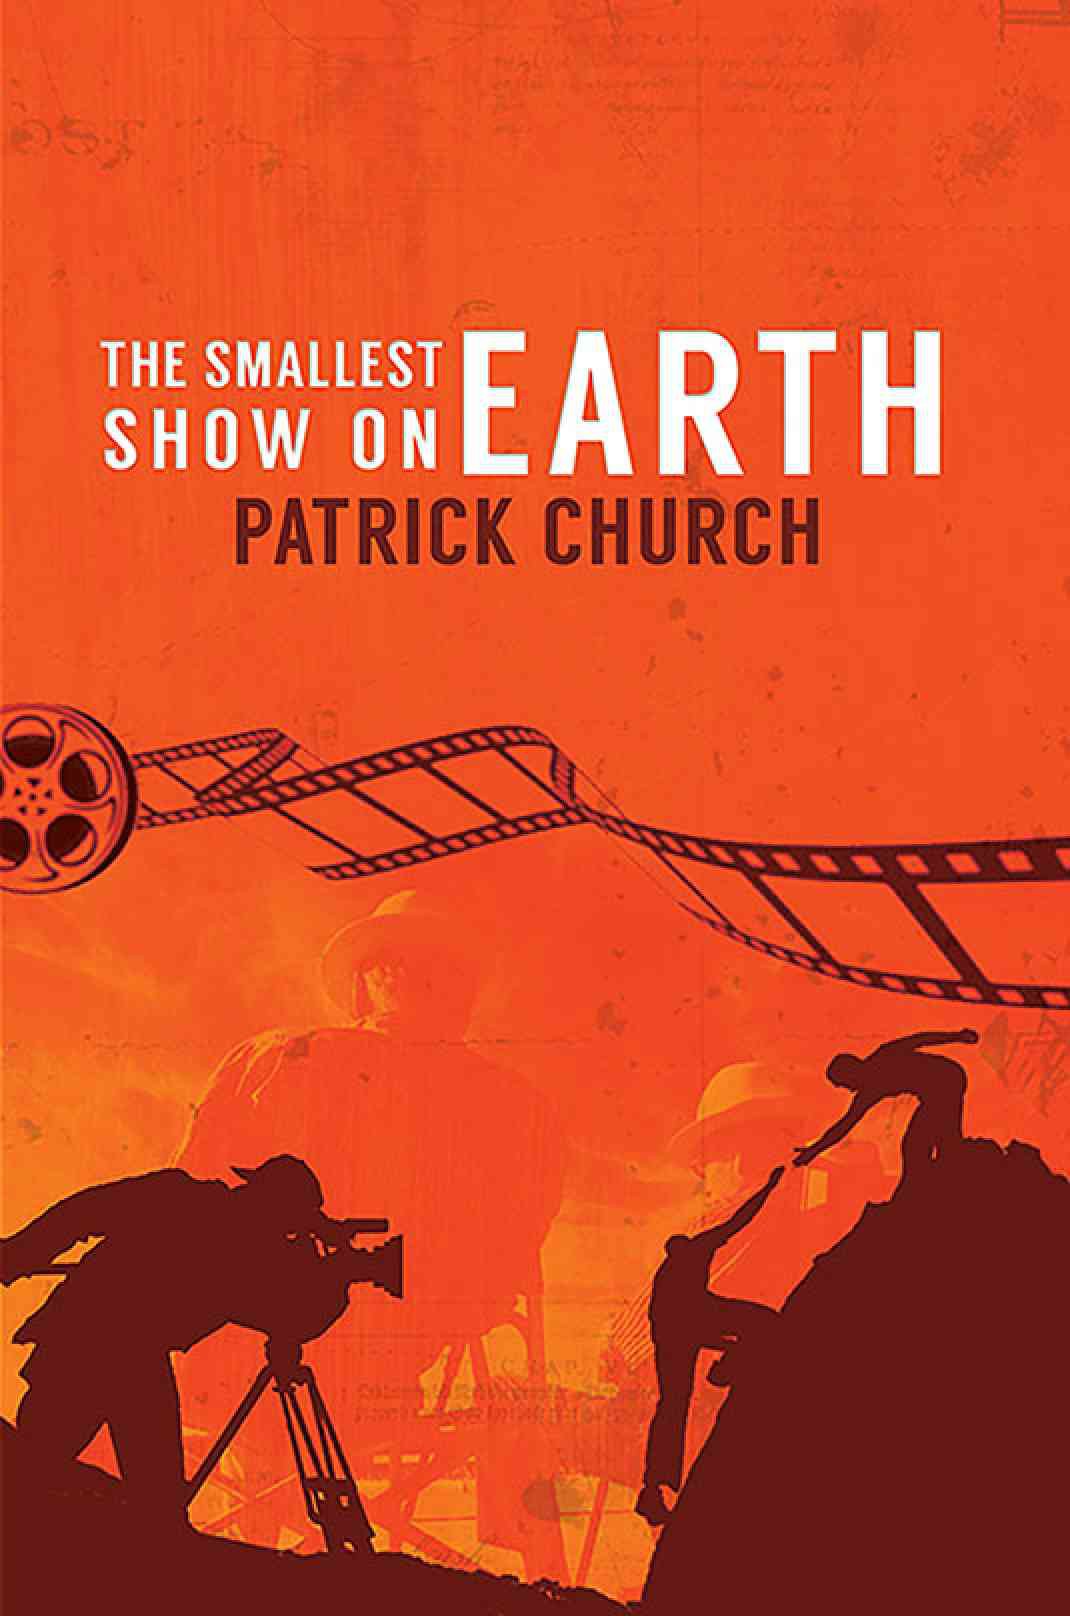 Patrick Church takes ‘The Smallest Show on Earth’ on the Road